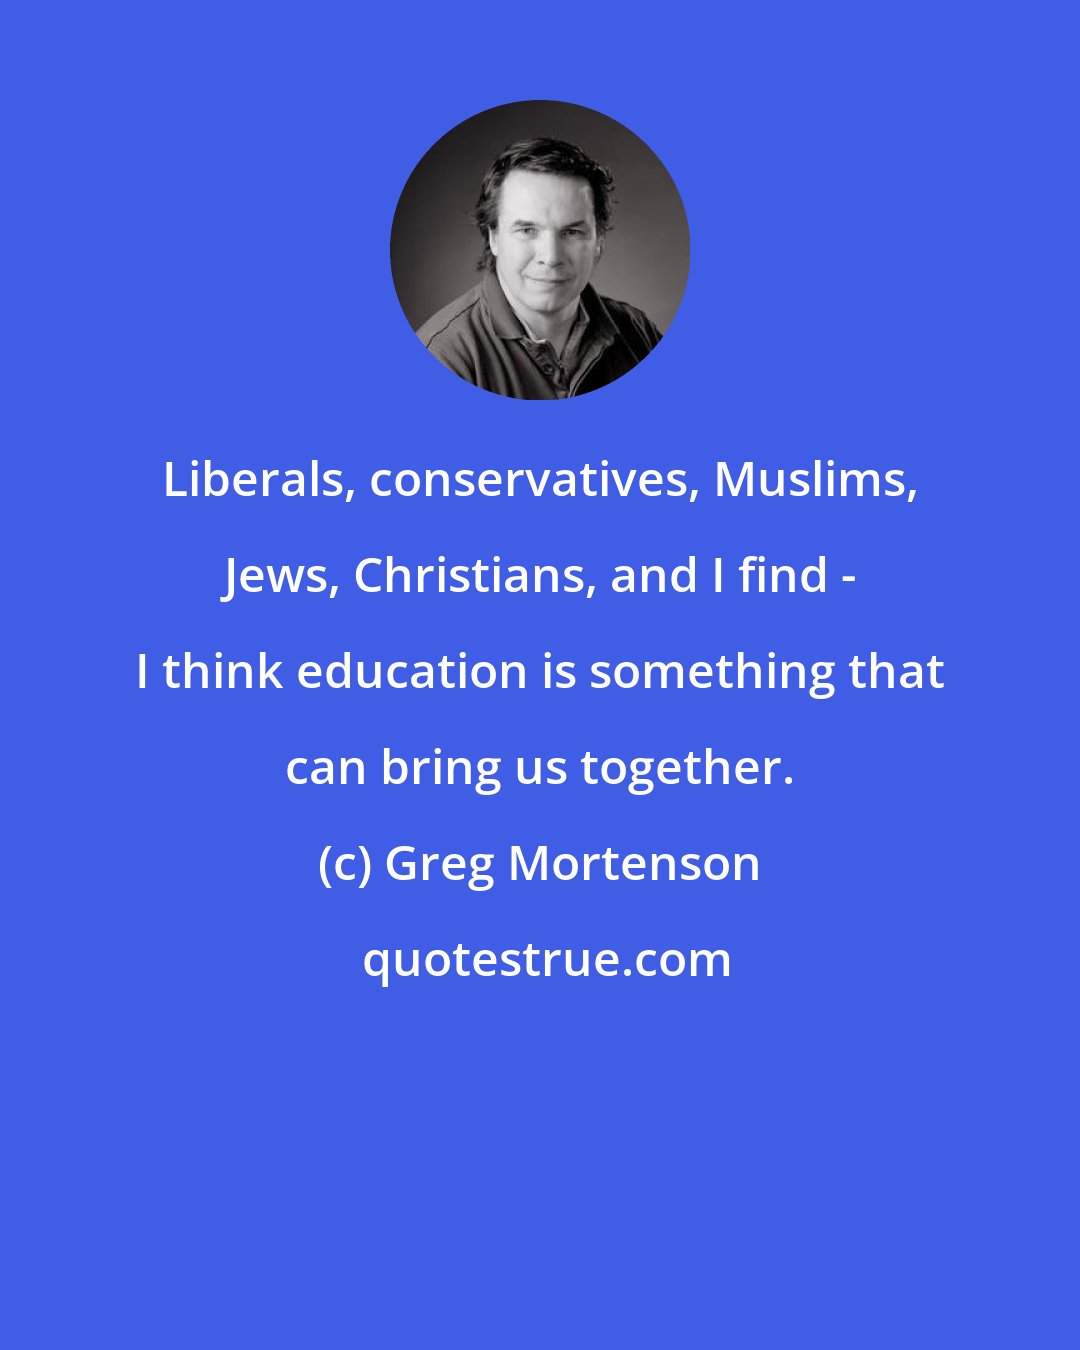 Greg Mortenson: Liberals, conservatives, Muslims, Jews, Christians, and I find - I think education is something that can bring us together.